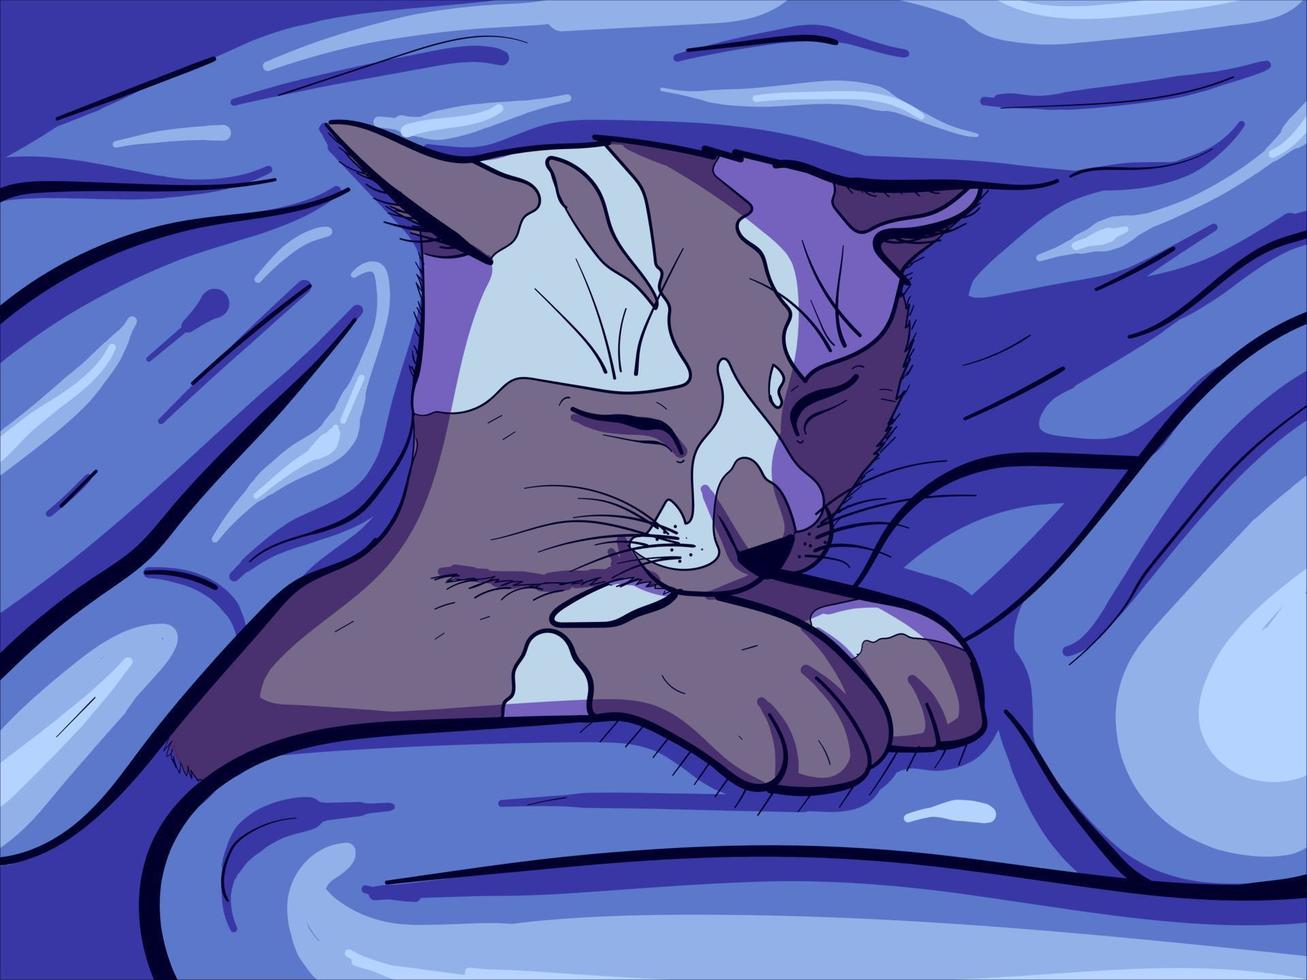 Vector art of a sleeping cat under a warn and cozy blanket. Digital drawing of a small kitten purring.